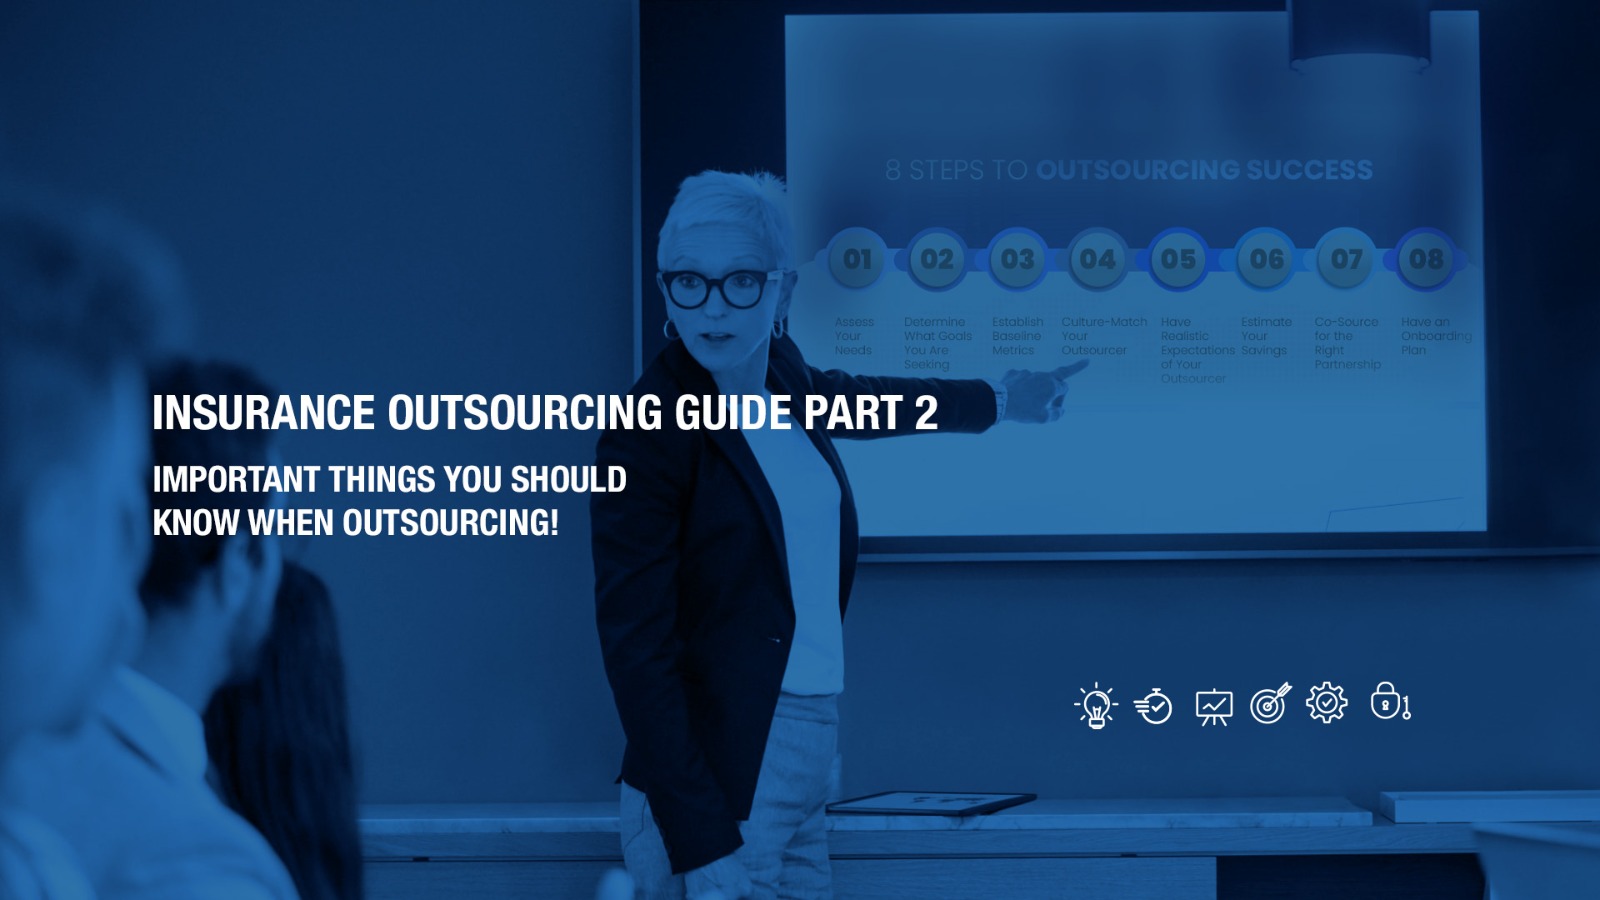 Insurance Outsourcing Guide Part 2